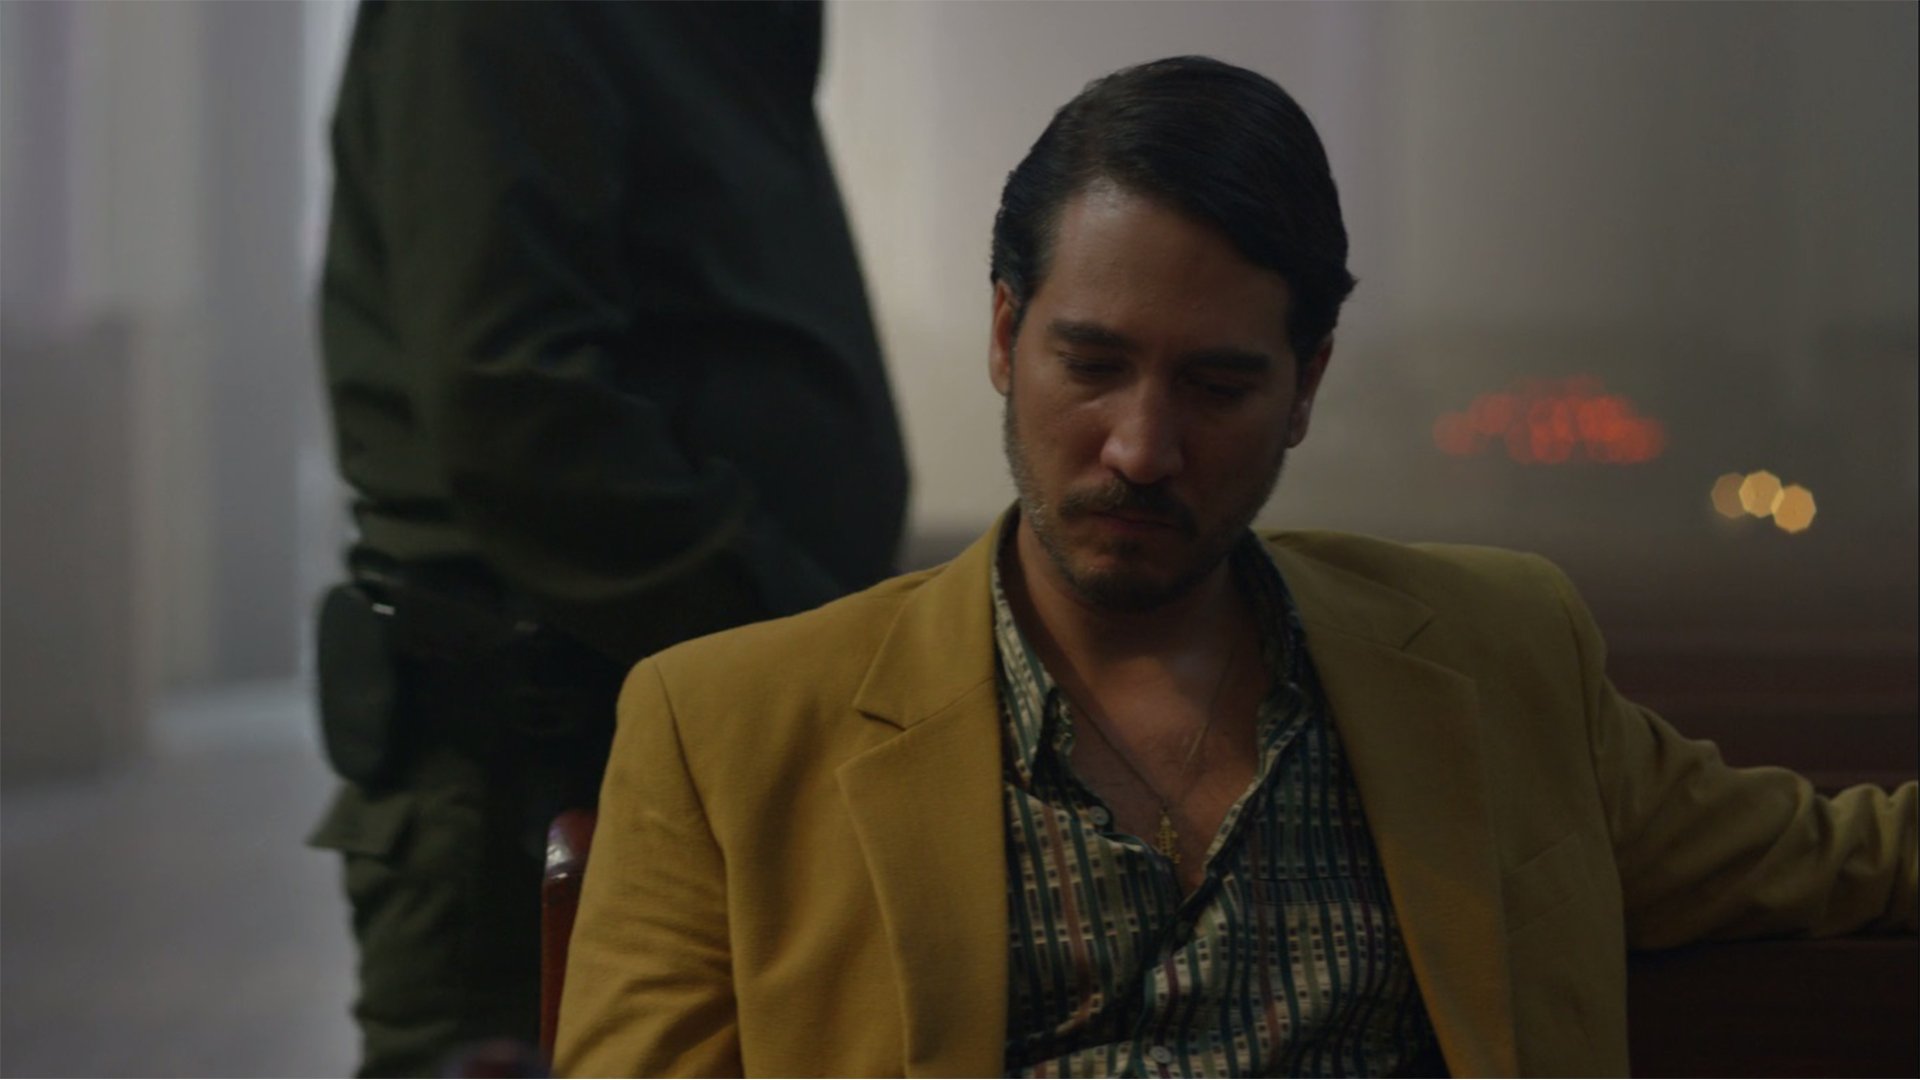 2 Narcos (TV Show) HD Wallpapers